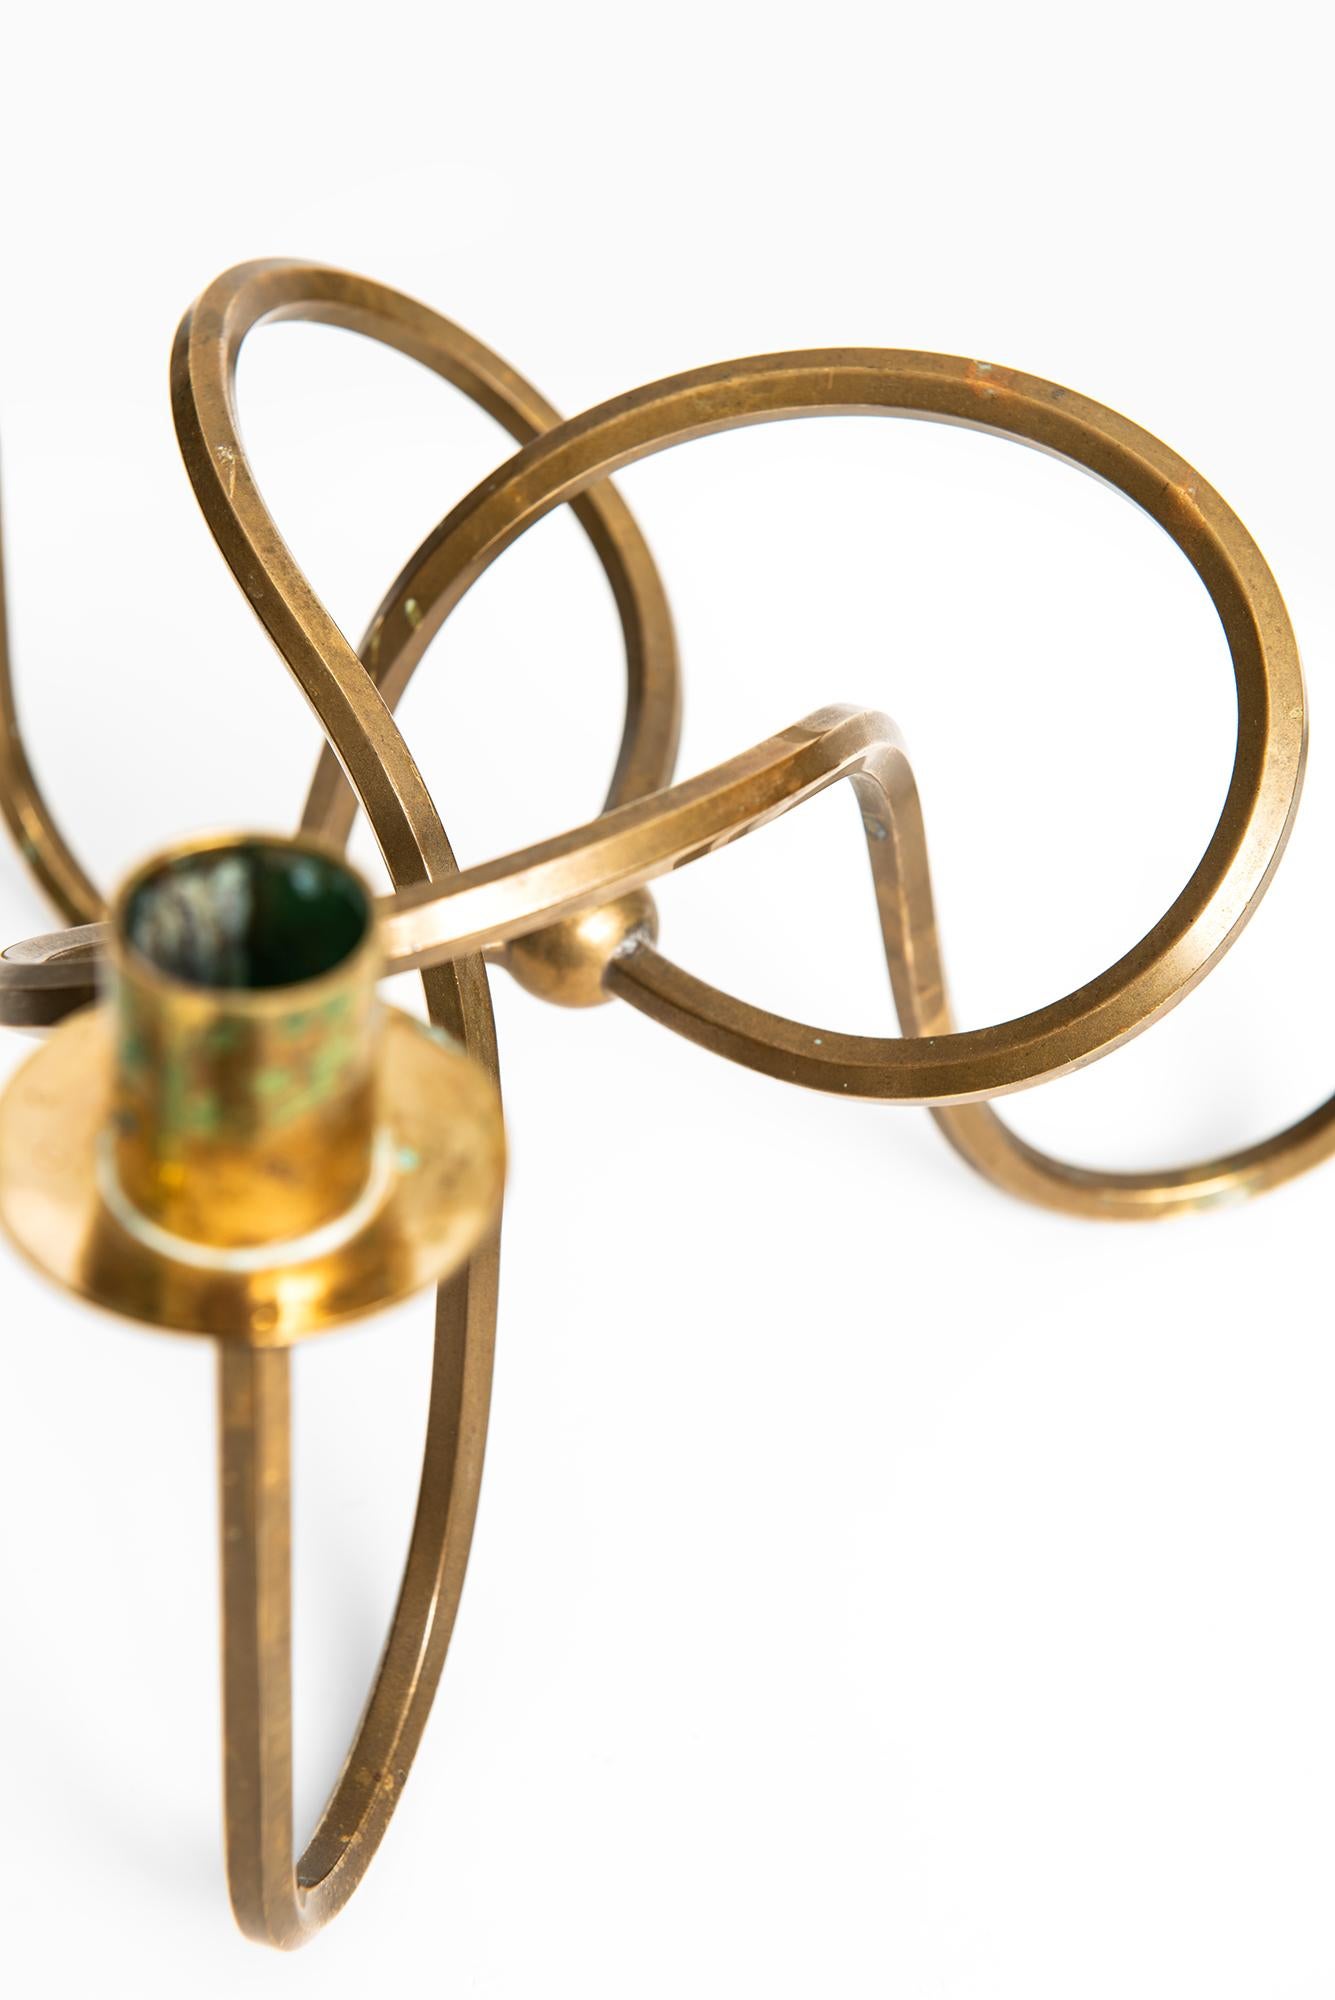 Candlestick (the knot of friendship) in brass designed by Josef Frank. Produced by Svenskt Tenn in Sweden.